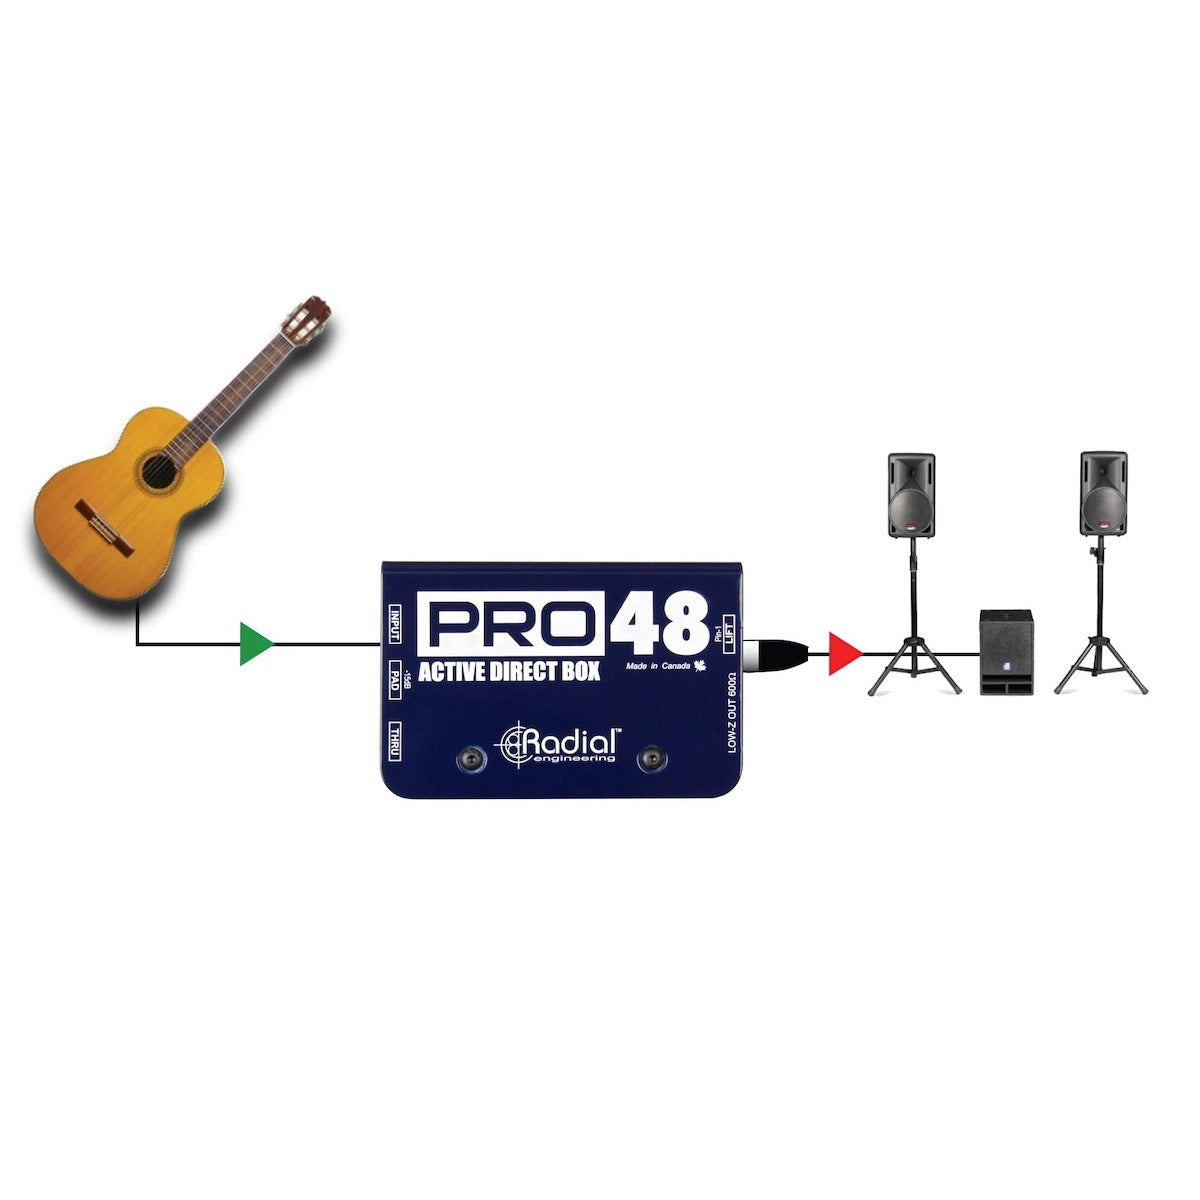 Radial Pro48 Active Direct Box application diagram, acoustic